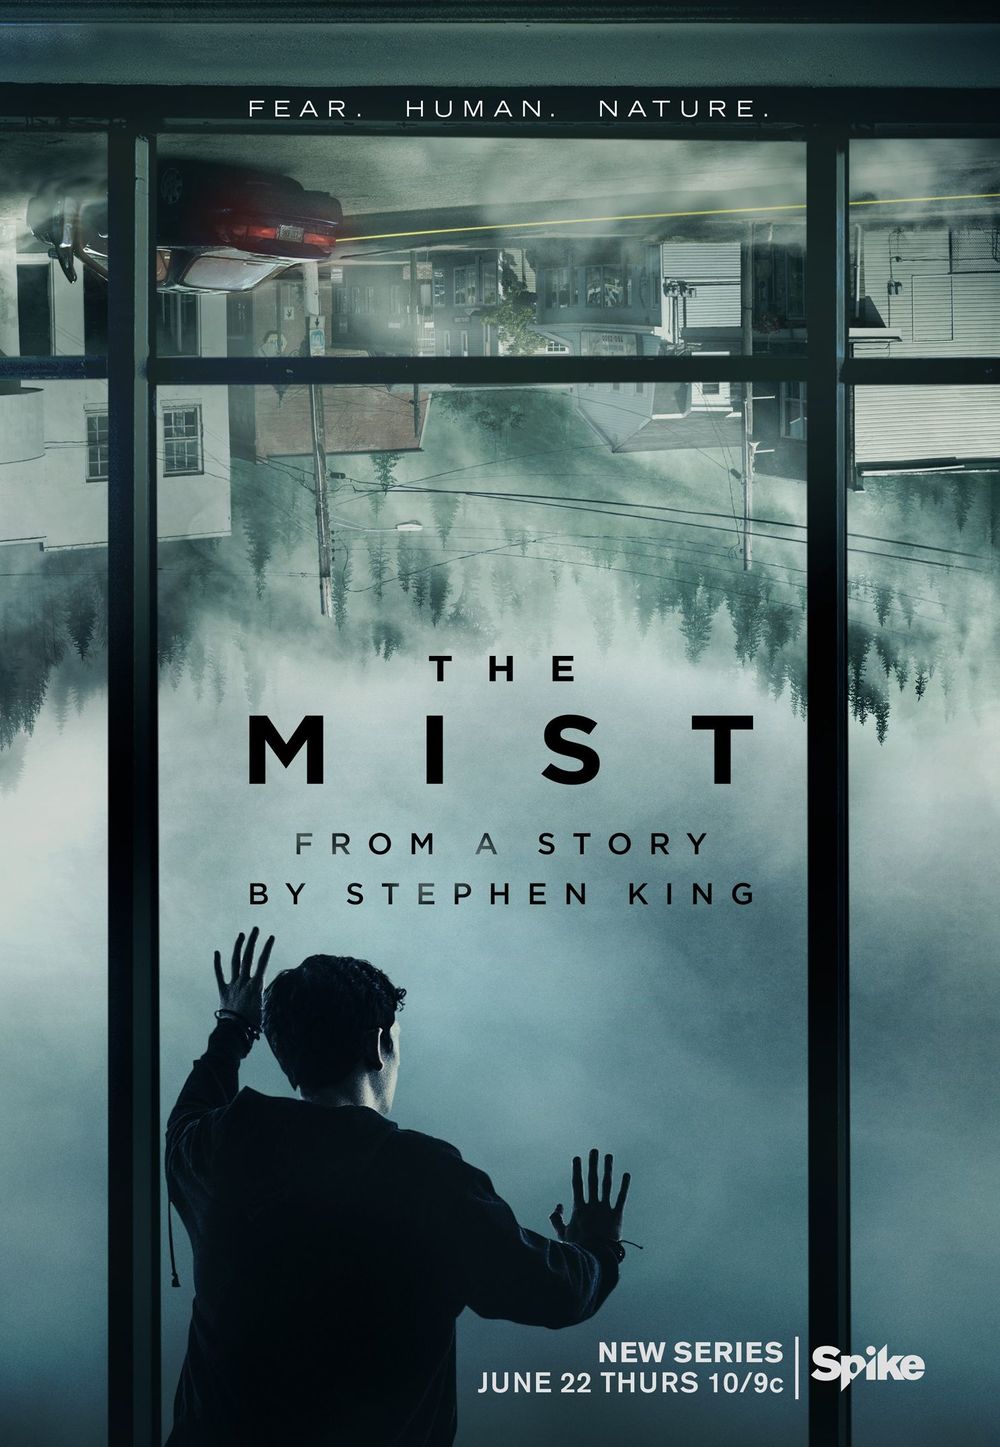 download the new for android Rising Mist